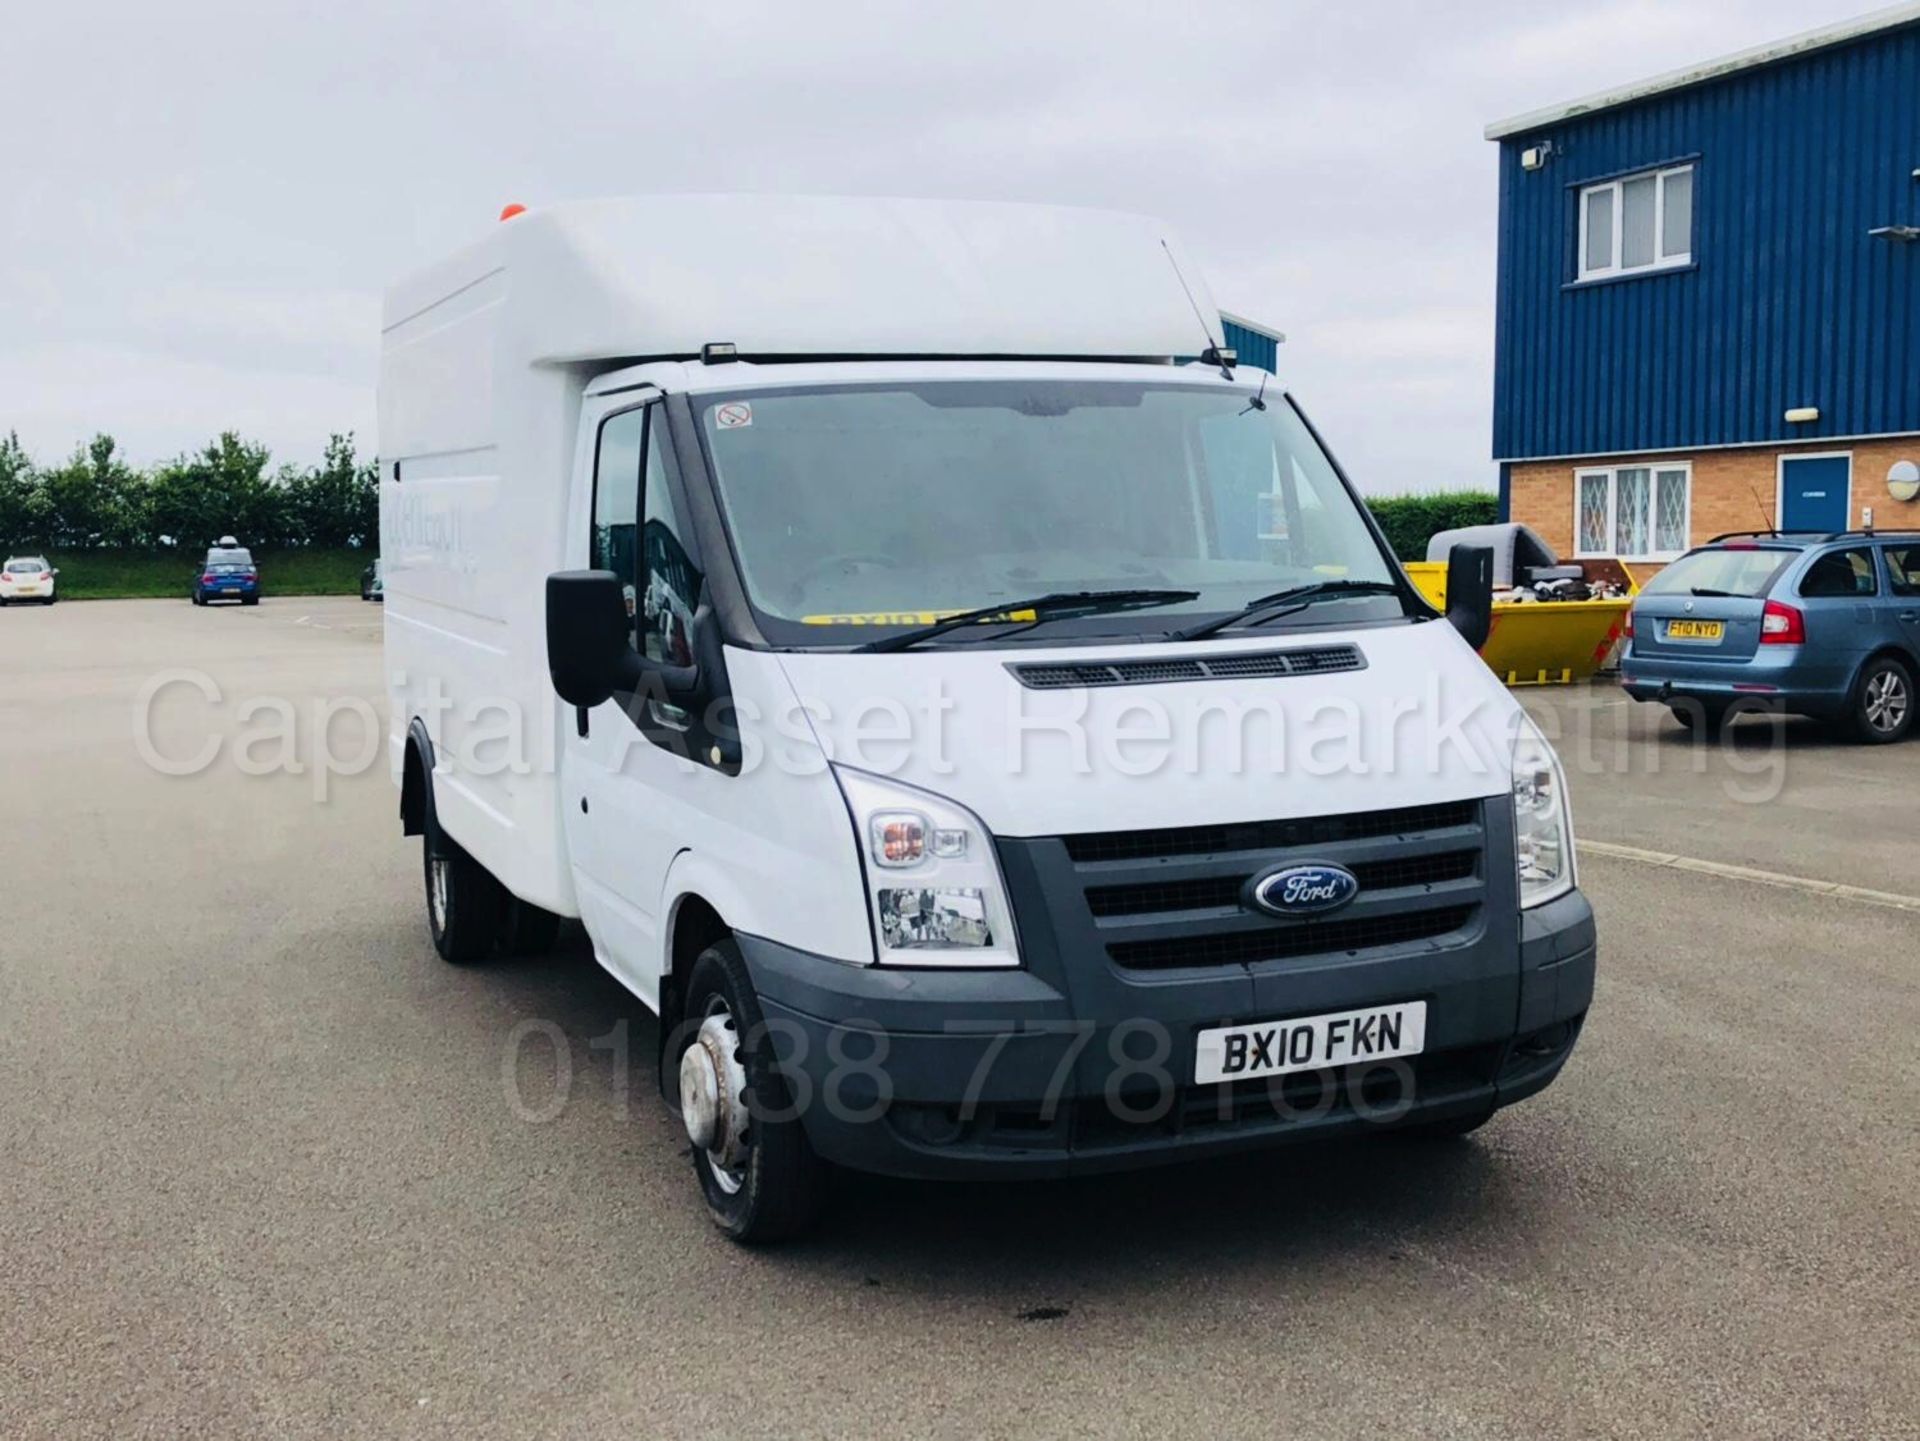 (On Sale) FORD TRANSIT 100 350 'BOX / LUTON VAN' (2010) '2.4 TDCI - 100 BHP' (1 COMPANY OWNER) - Image 2 of 29